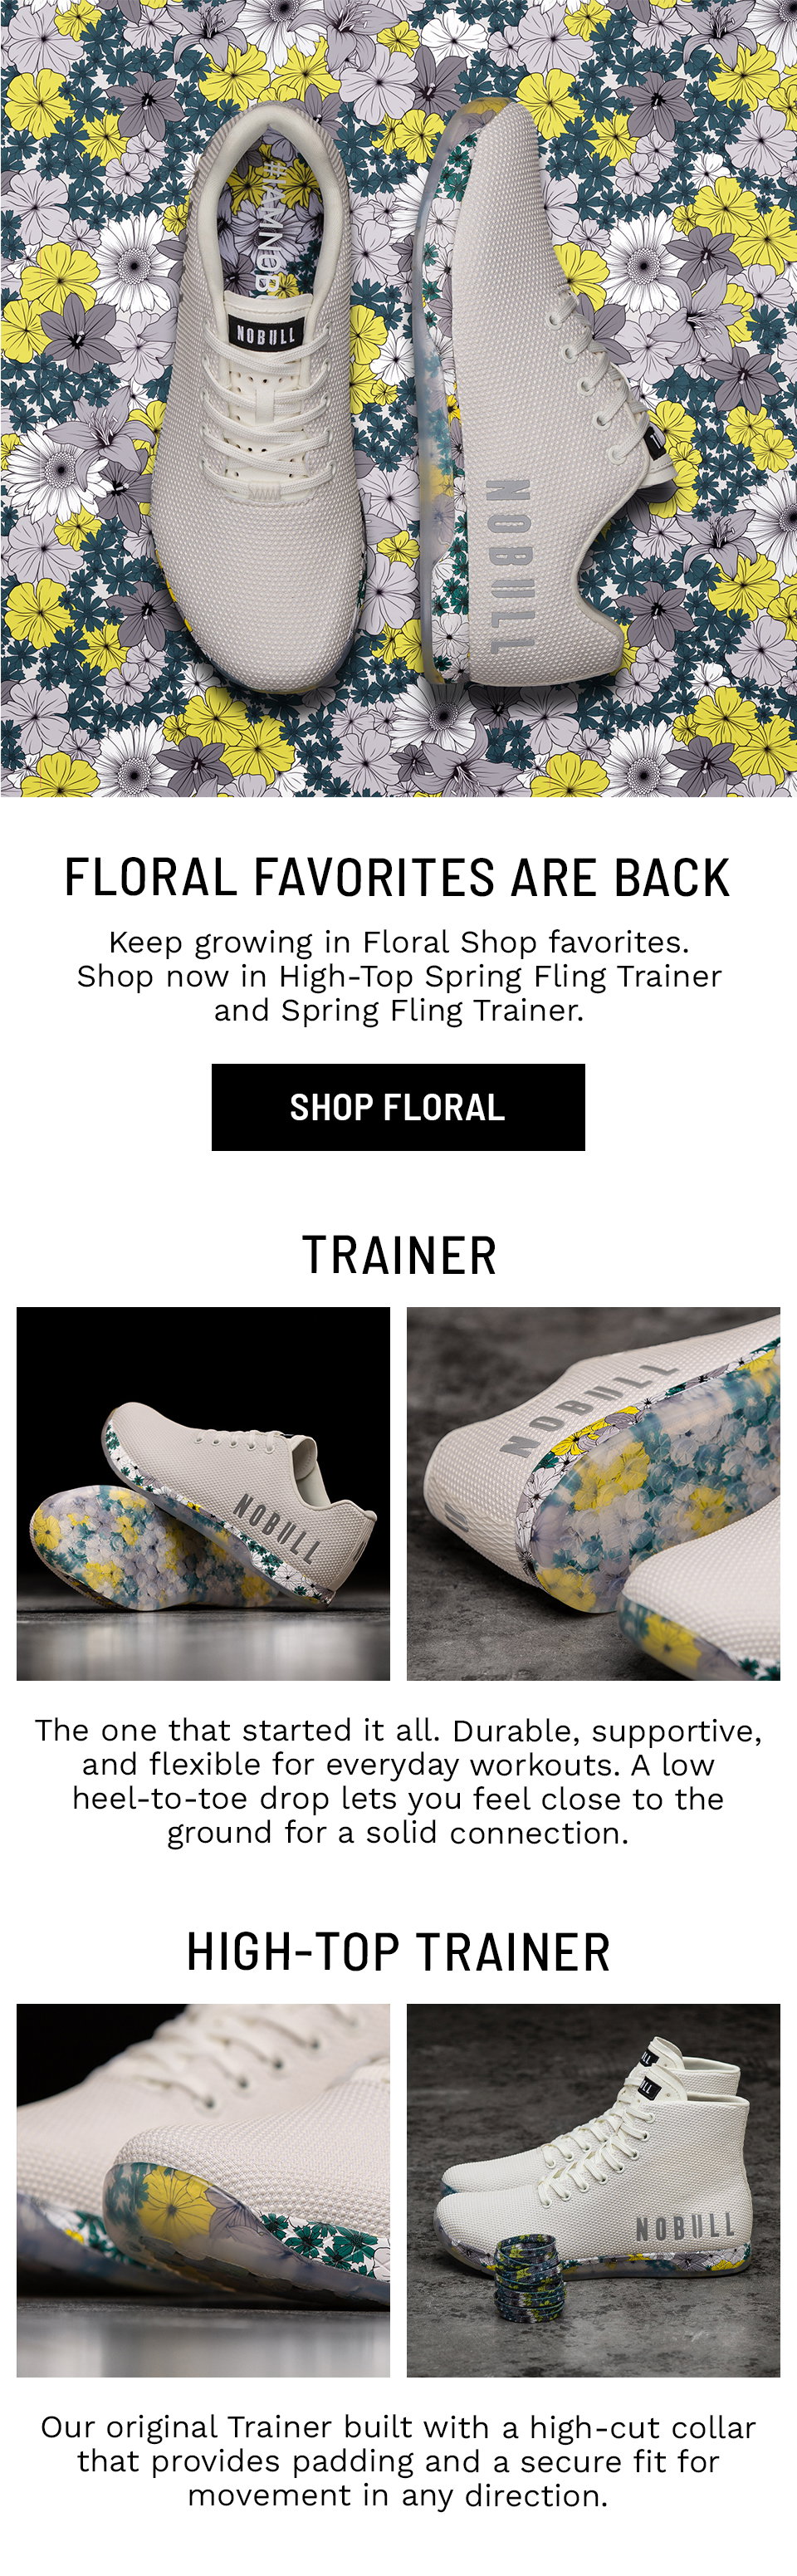 Spring-Ready Floral Accessories : NOBULL